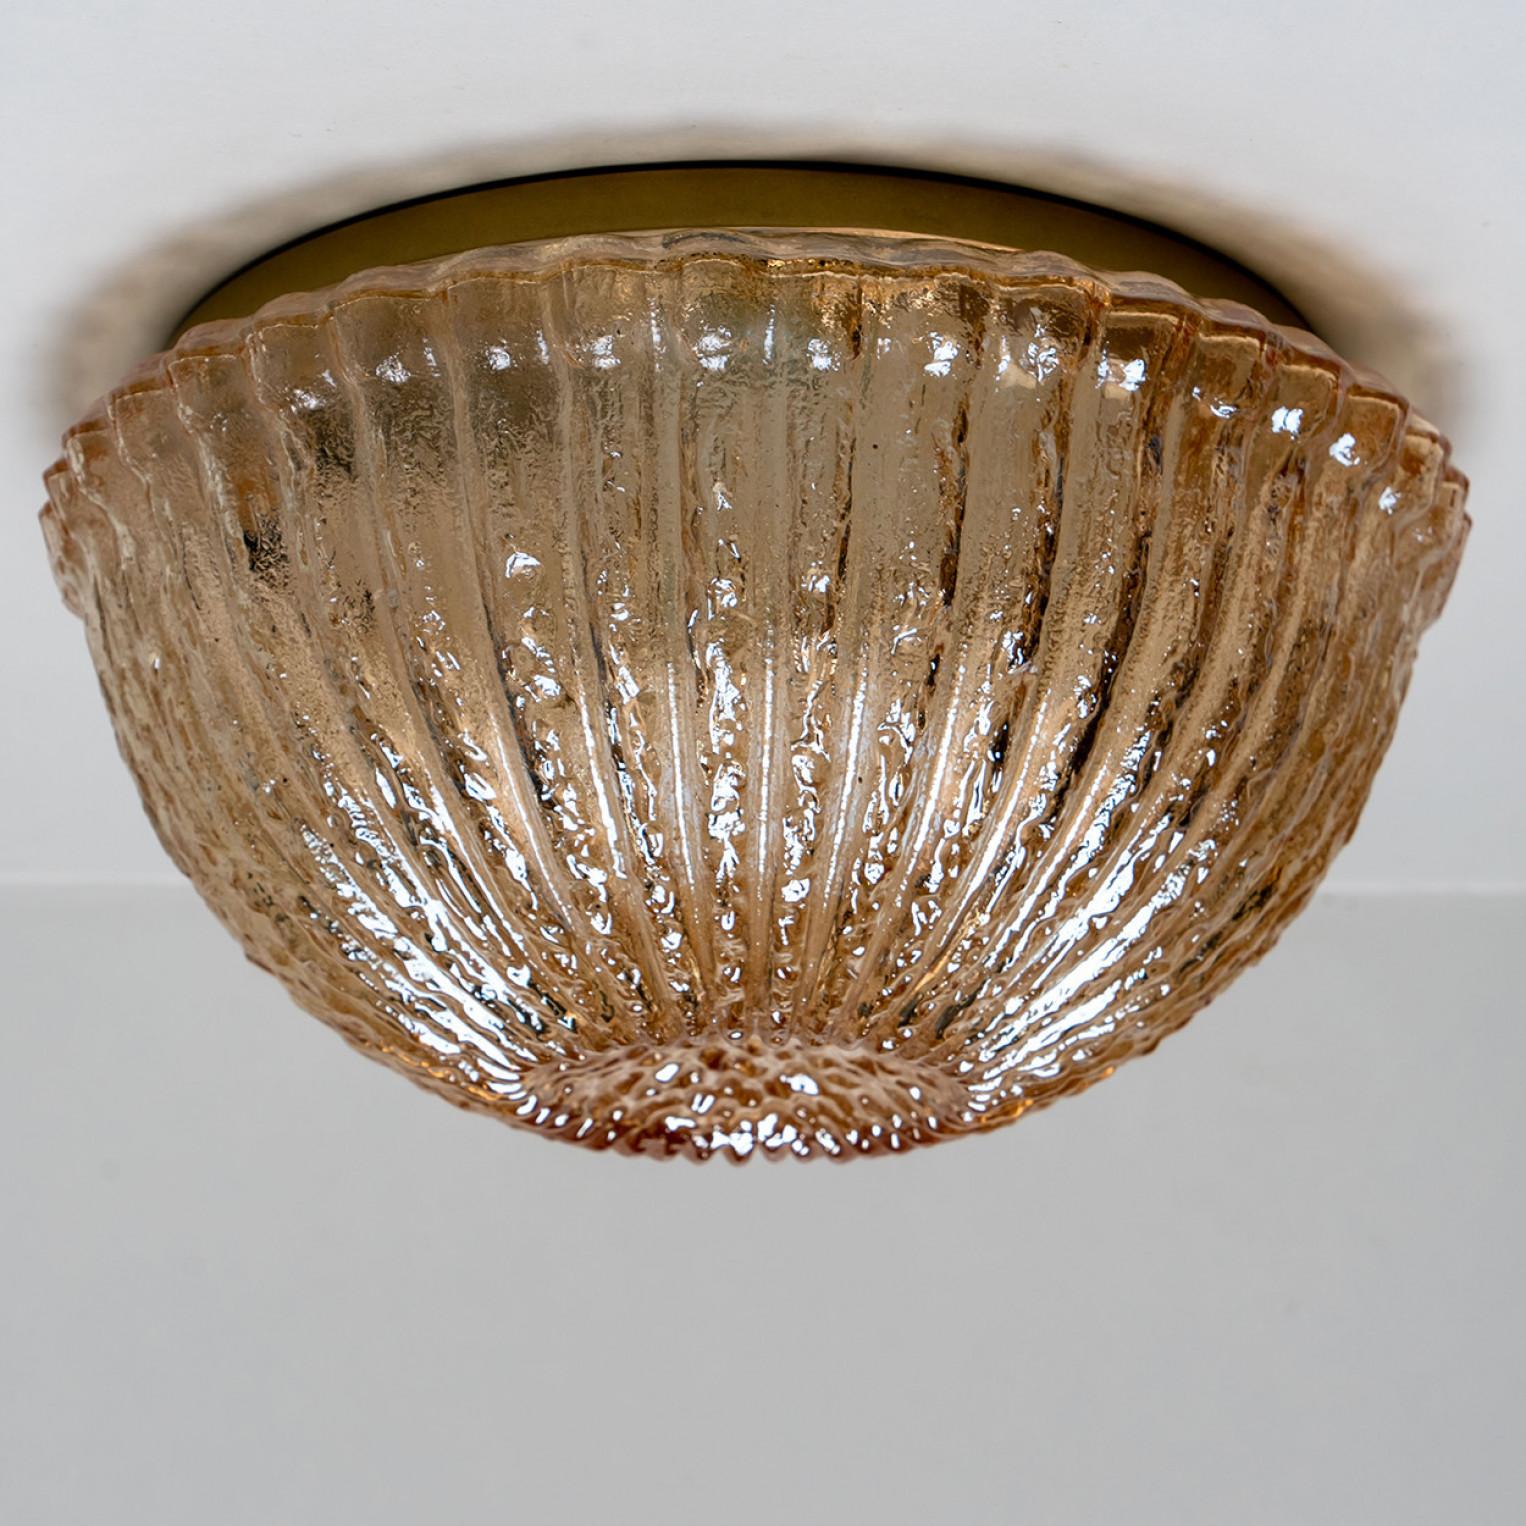 Mid-century flush mounts, wall lights or sconces by Peill & Putzler in the 1970s.
Featuring a smoked glass globe shade with a waved/ribbed glass. Casting a stunning light across a wall or ceiling. The brass fixture and smoked glass looks stunning in